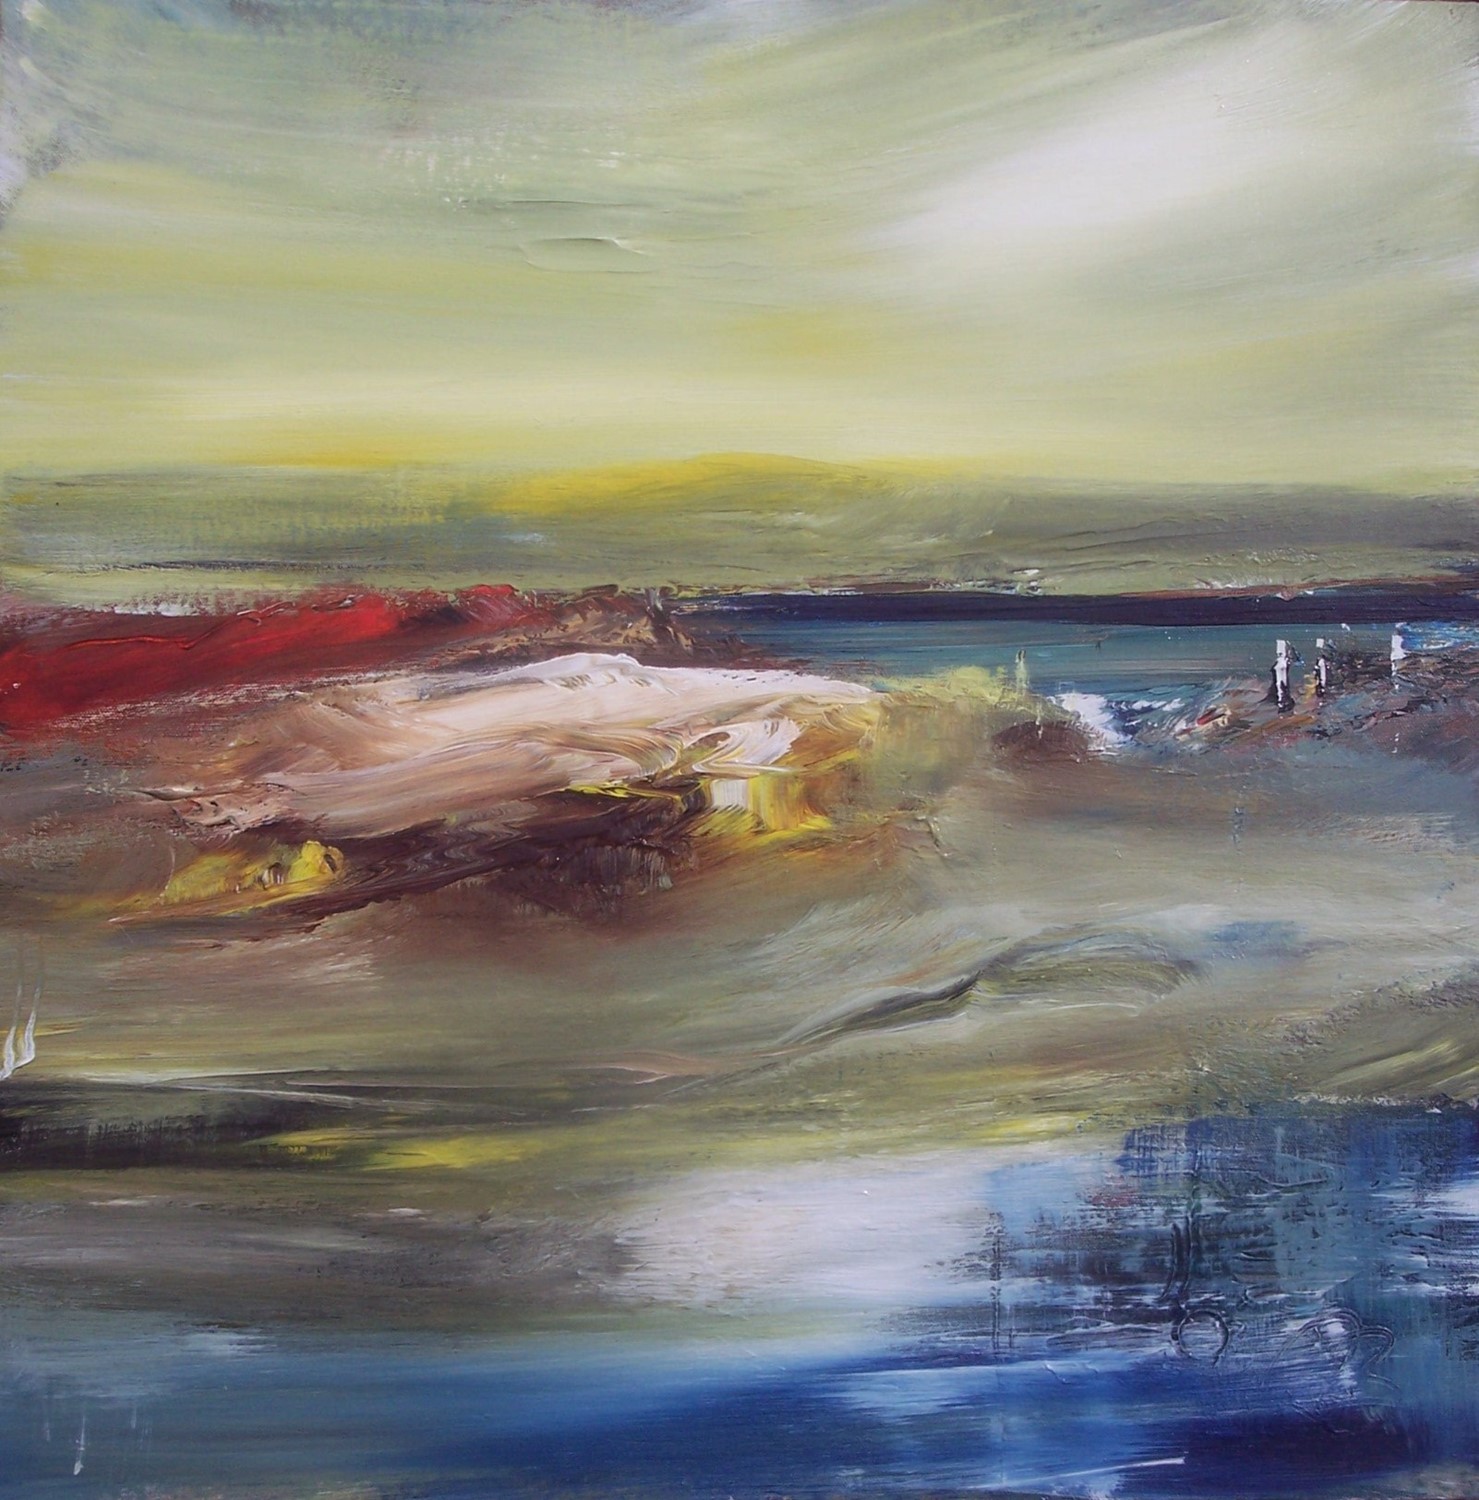 'Reflected Waters' by artist Rosanne Barr